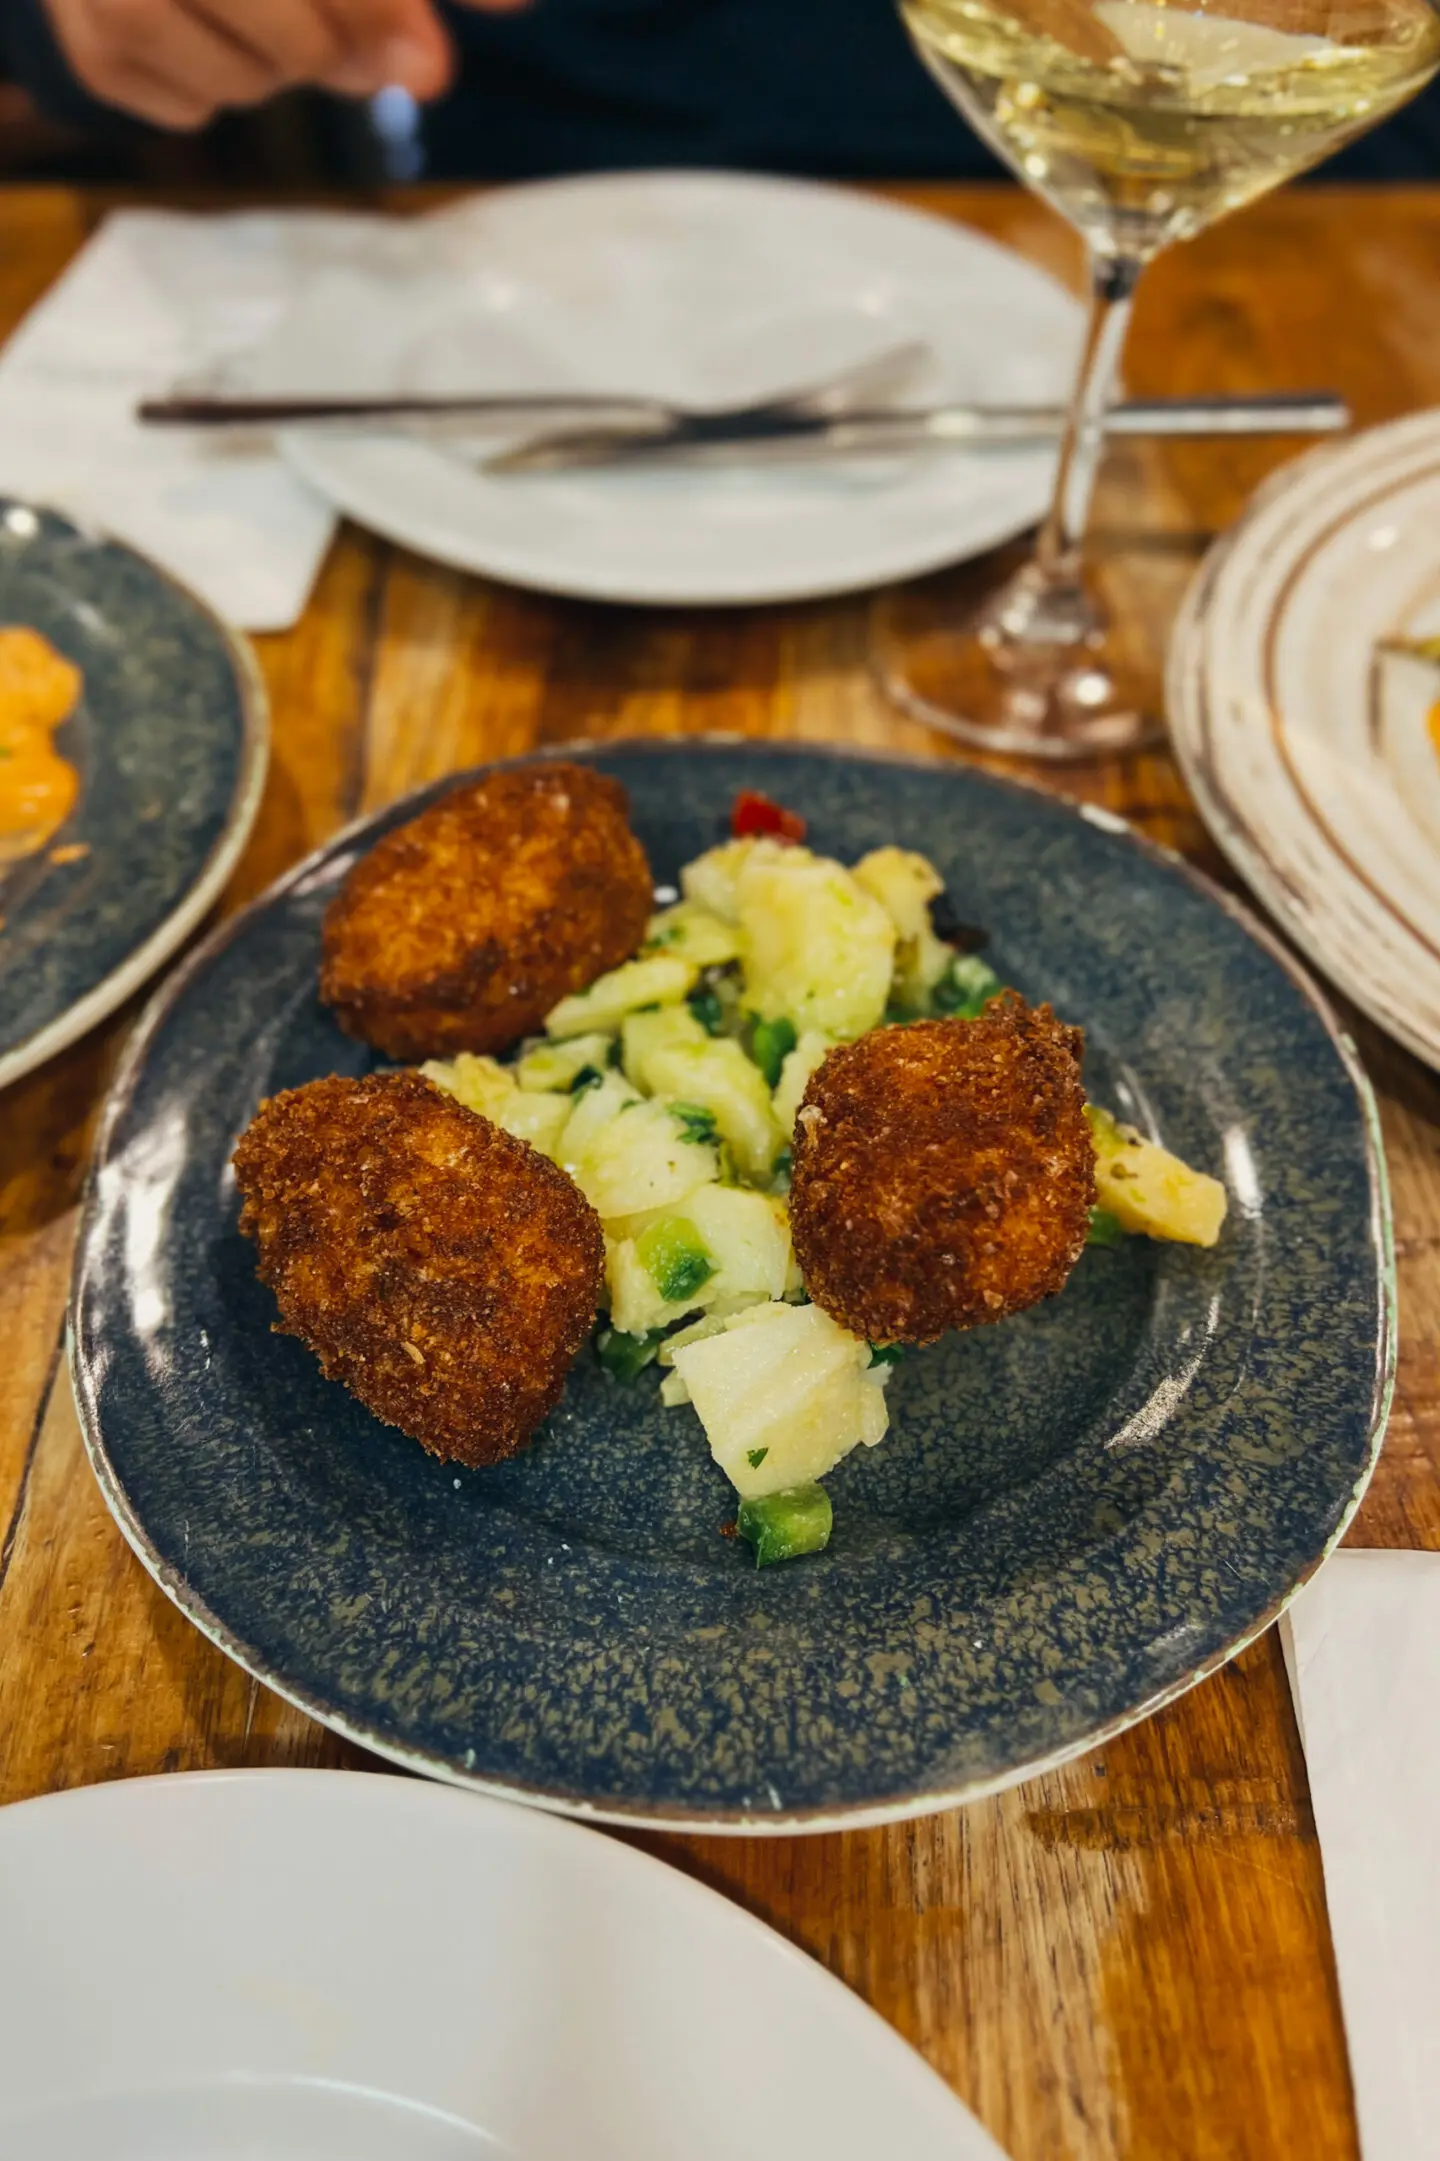 Seville, croquetas, by Dancing the Earth